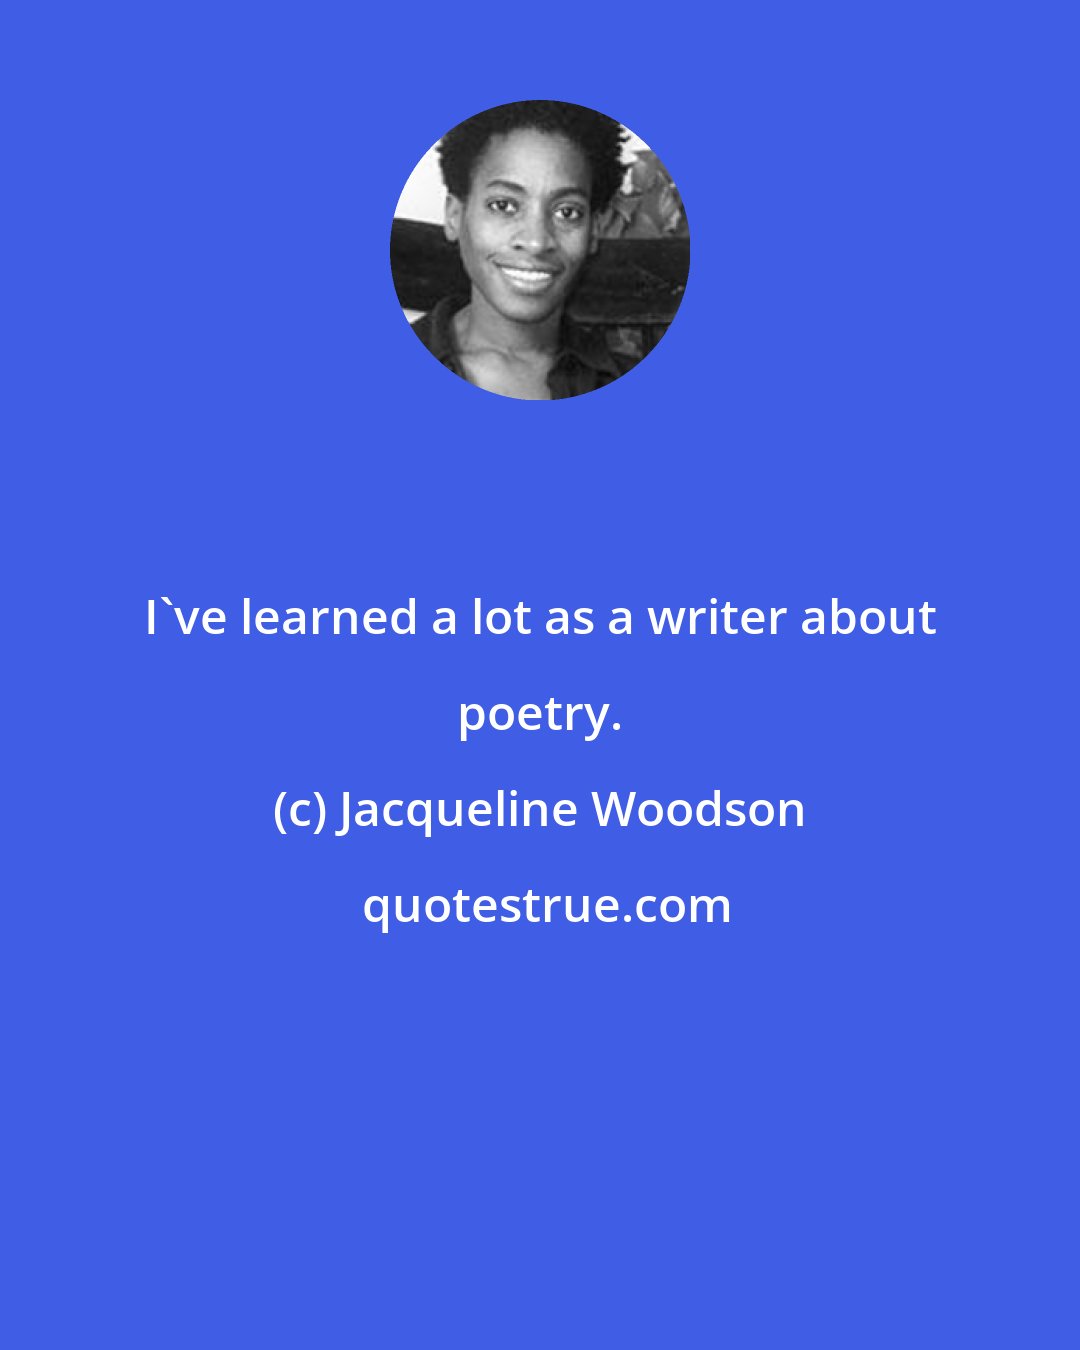 Jacqueline Woodson: I've learned a lot as a writer about poetry.